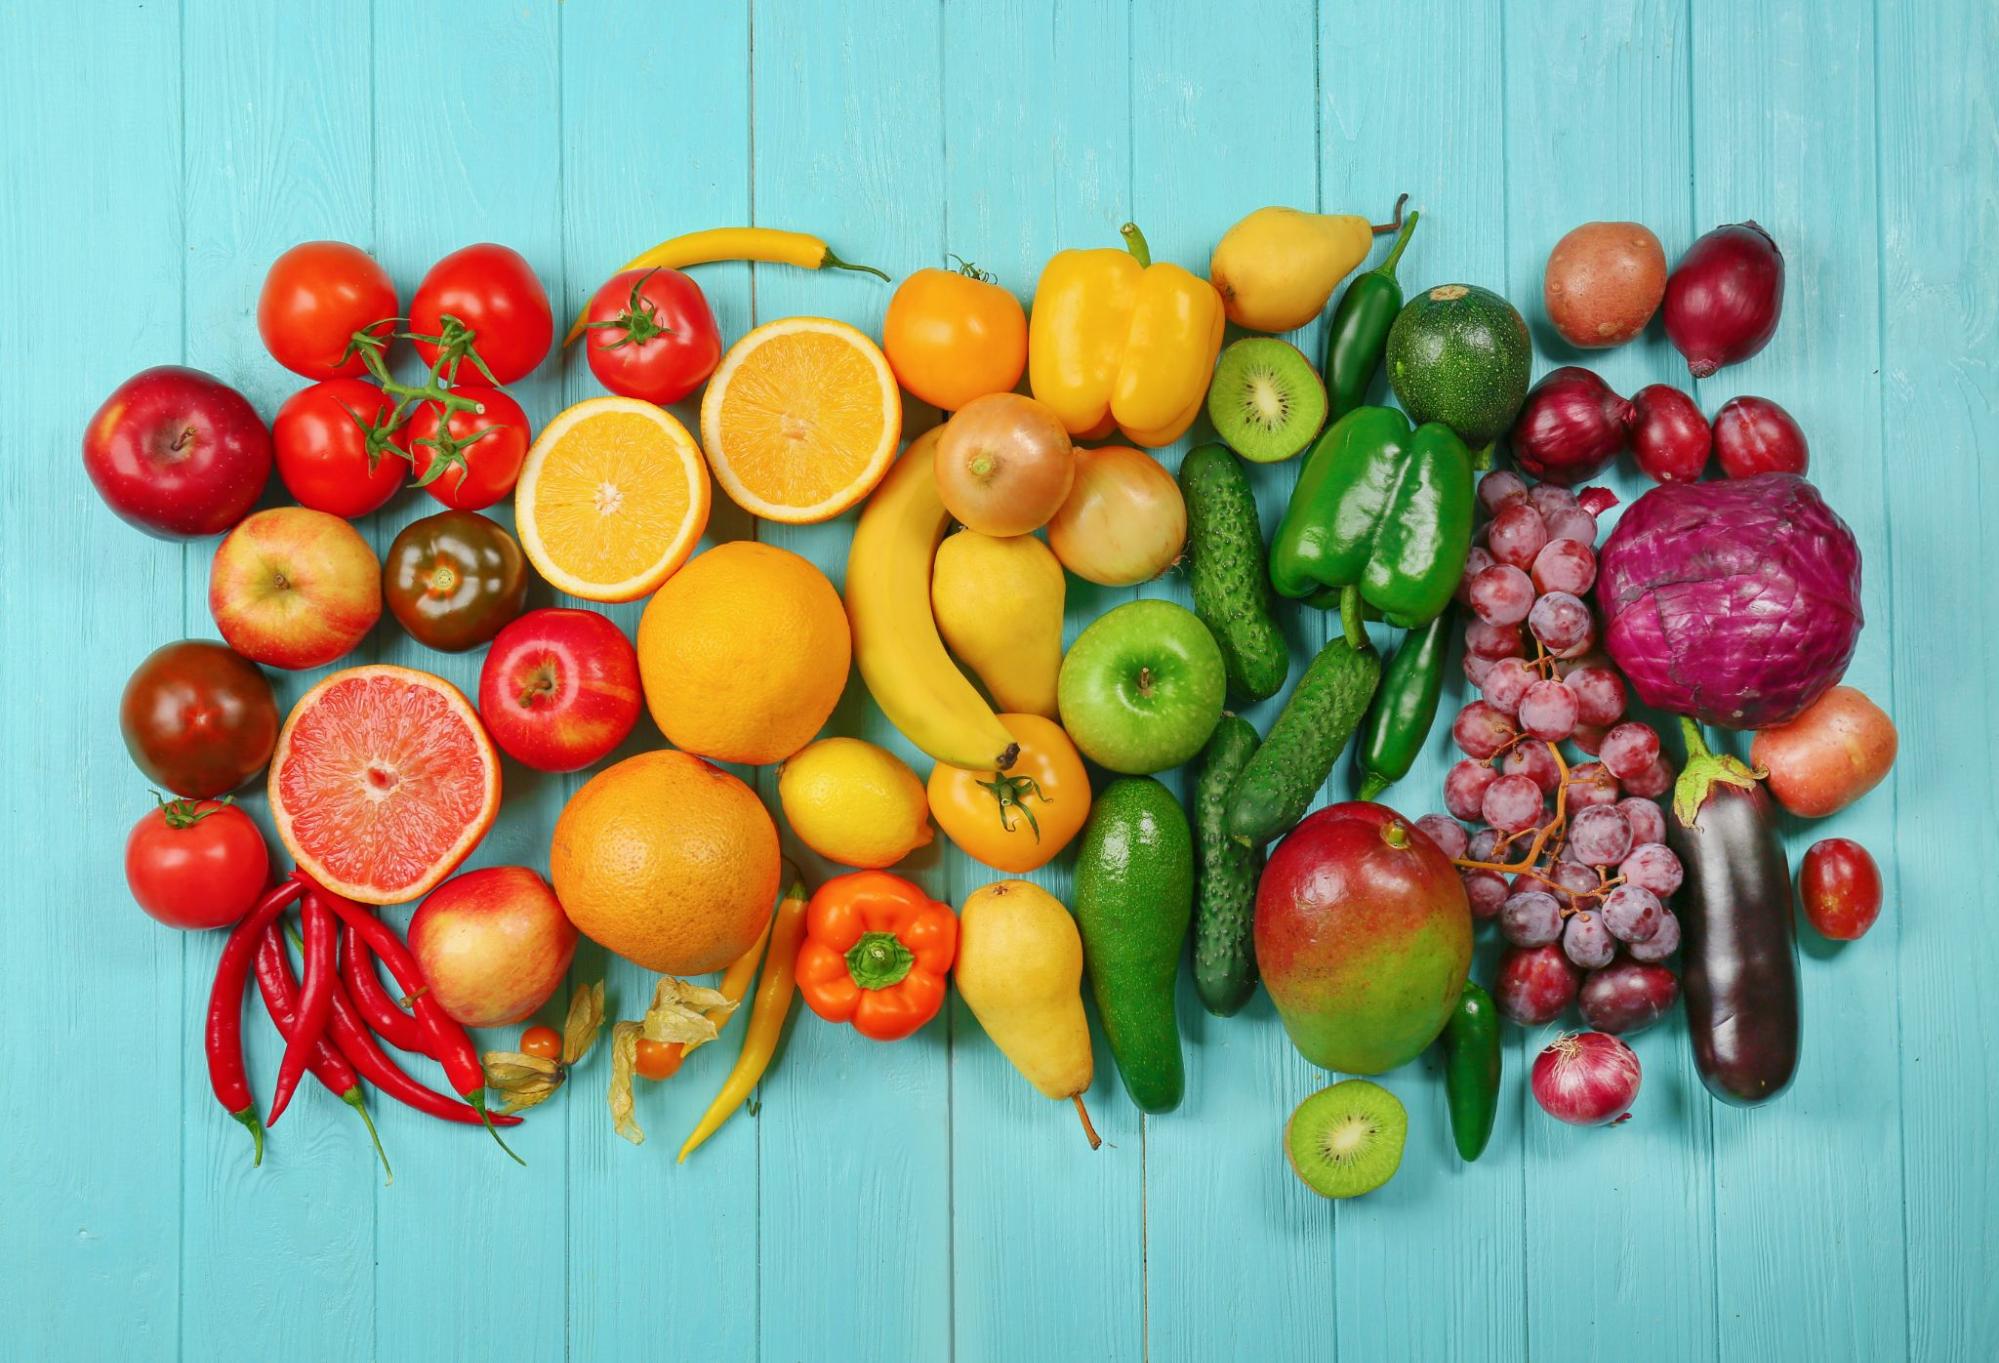 Creative composition made of fruits and vegetables in rainbow colors on wooden background